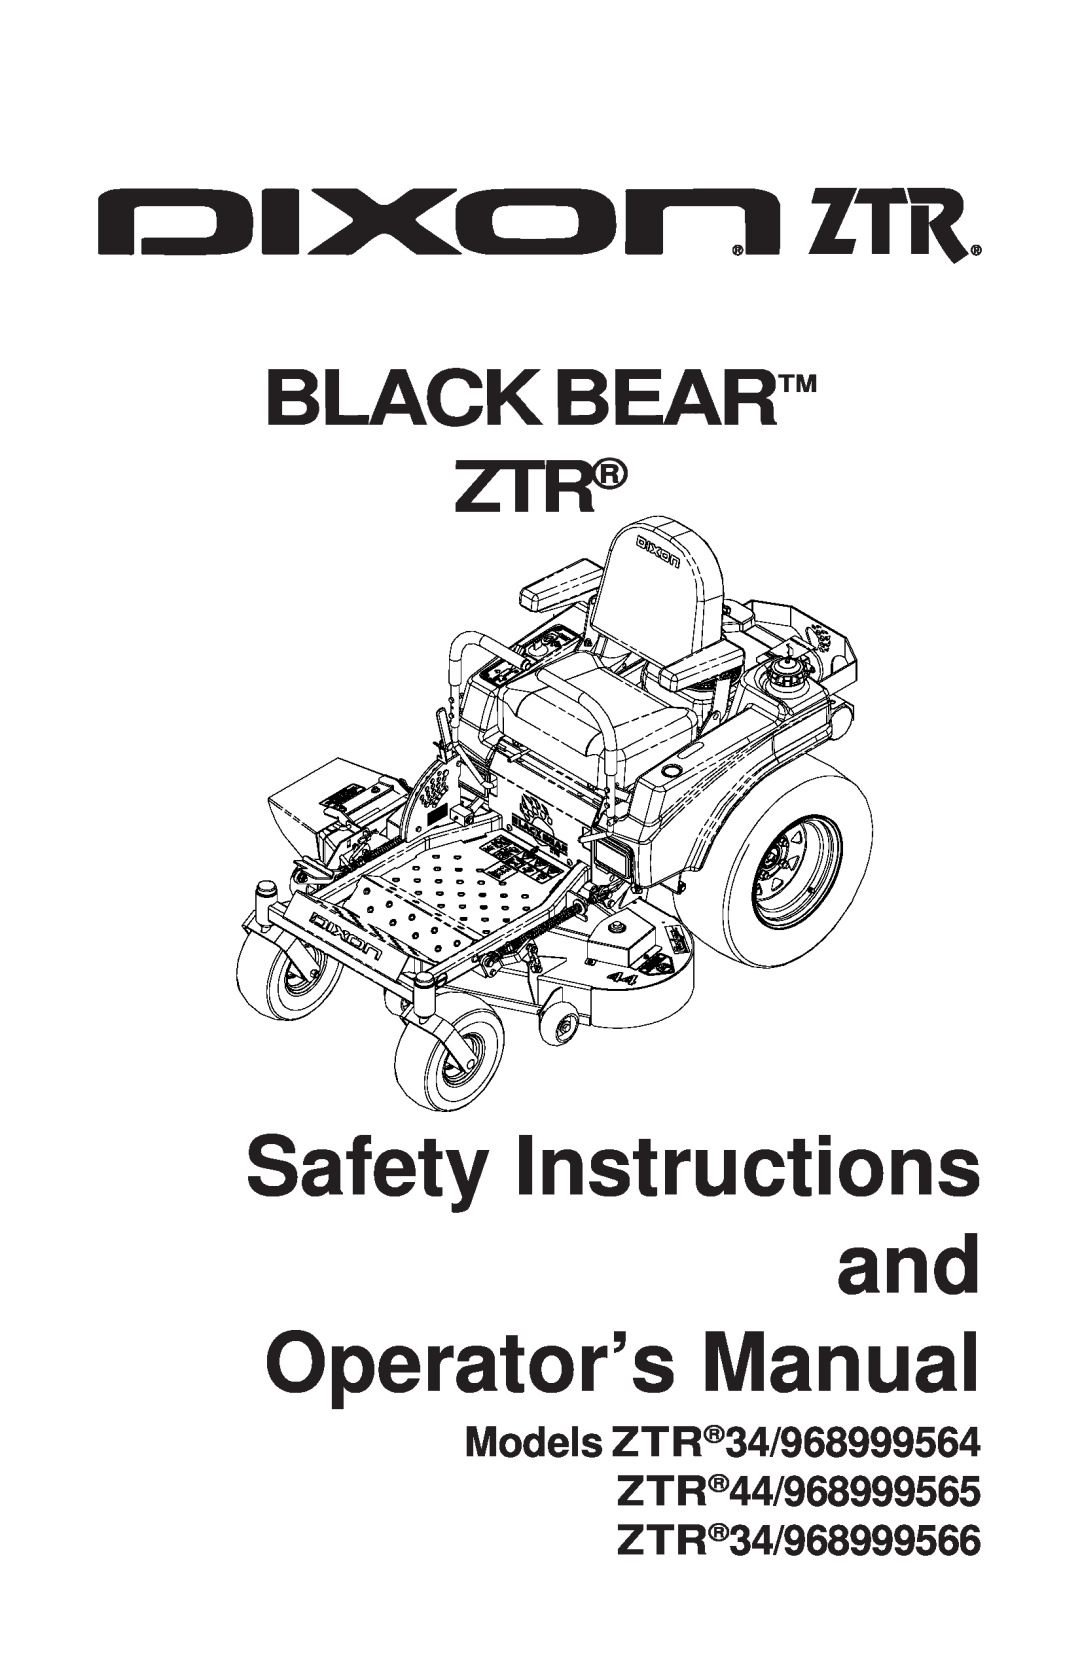 Dixon ZTR 34, ZTR 44, ZTR 34 manual Safety Instructions and Operator’s Manual, Blackbear 